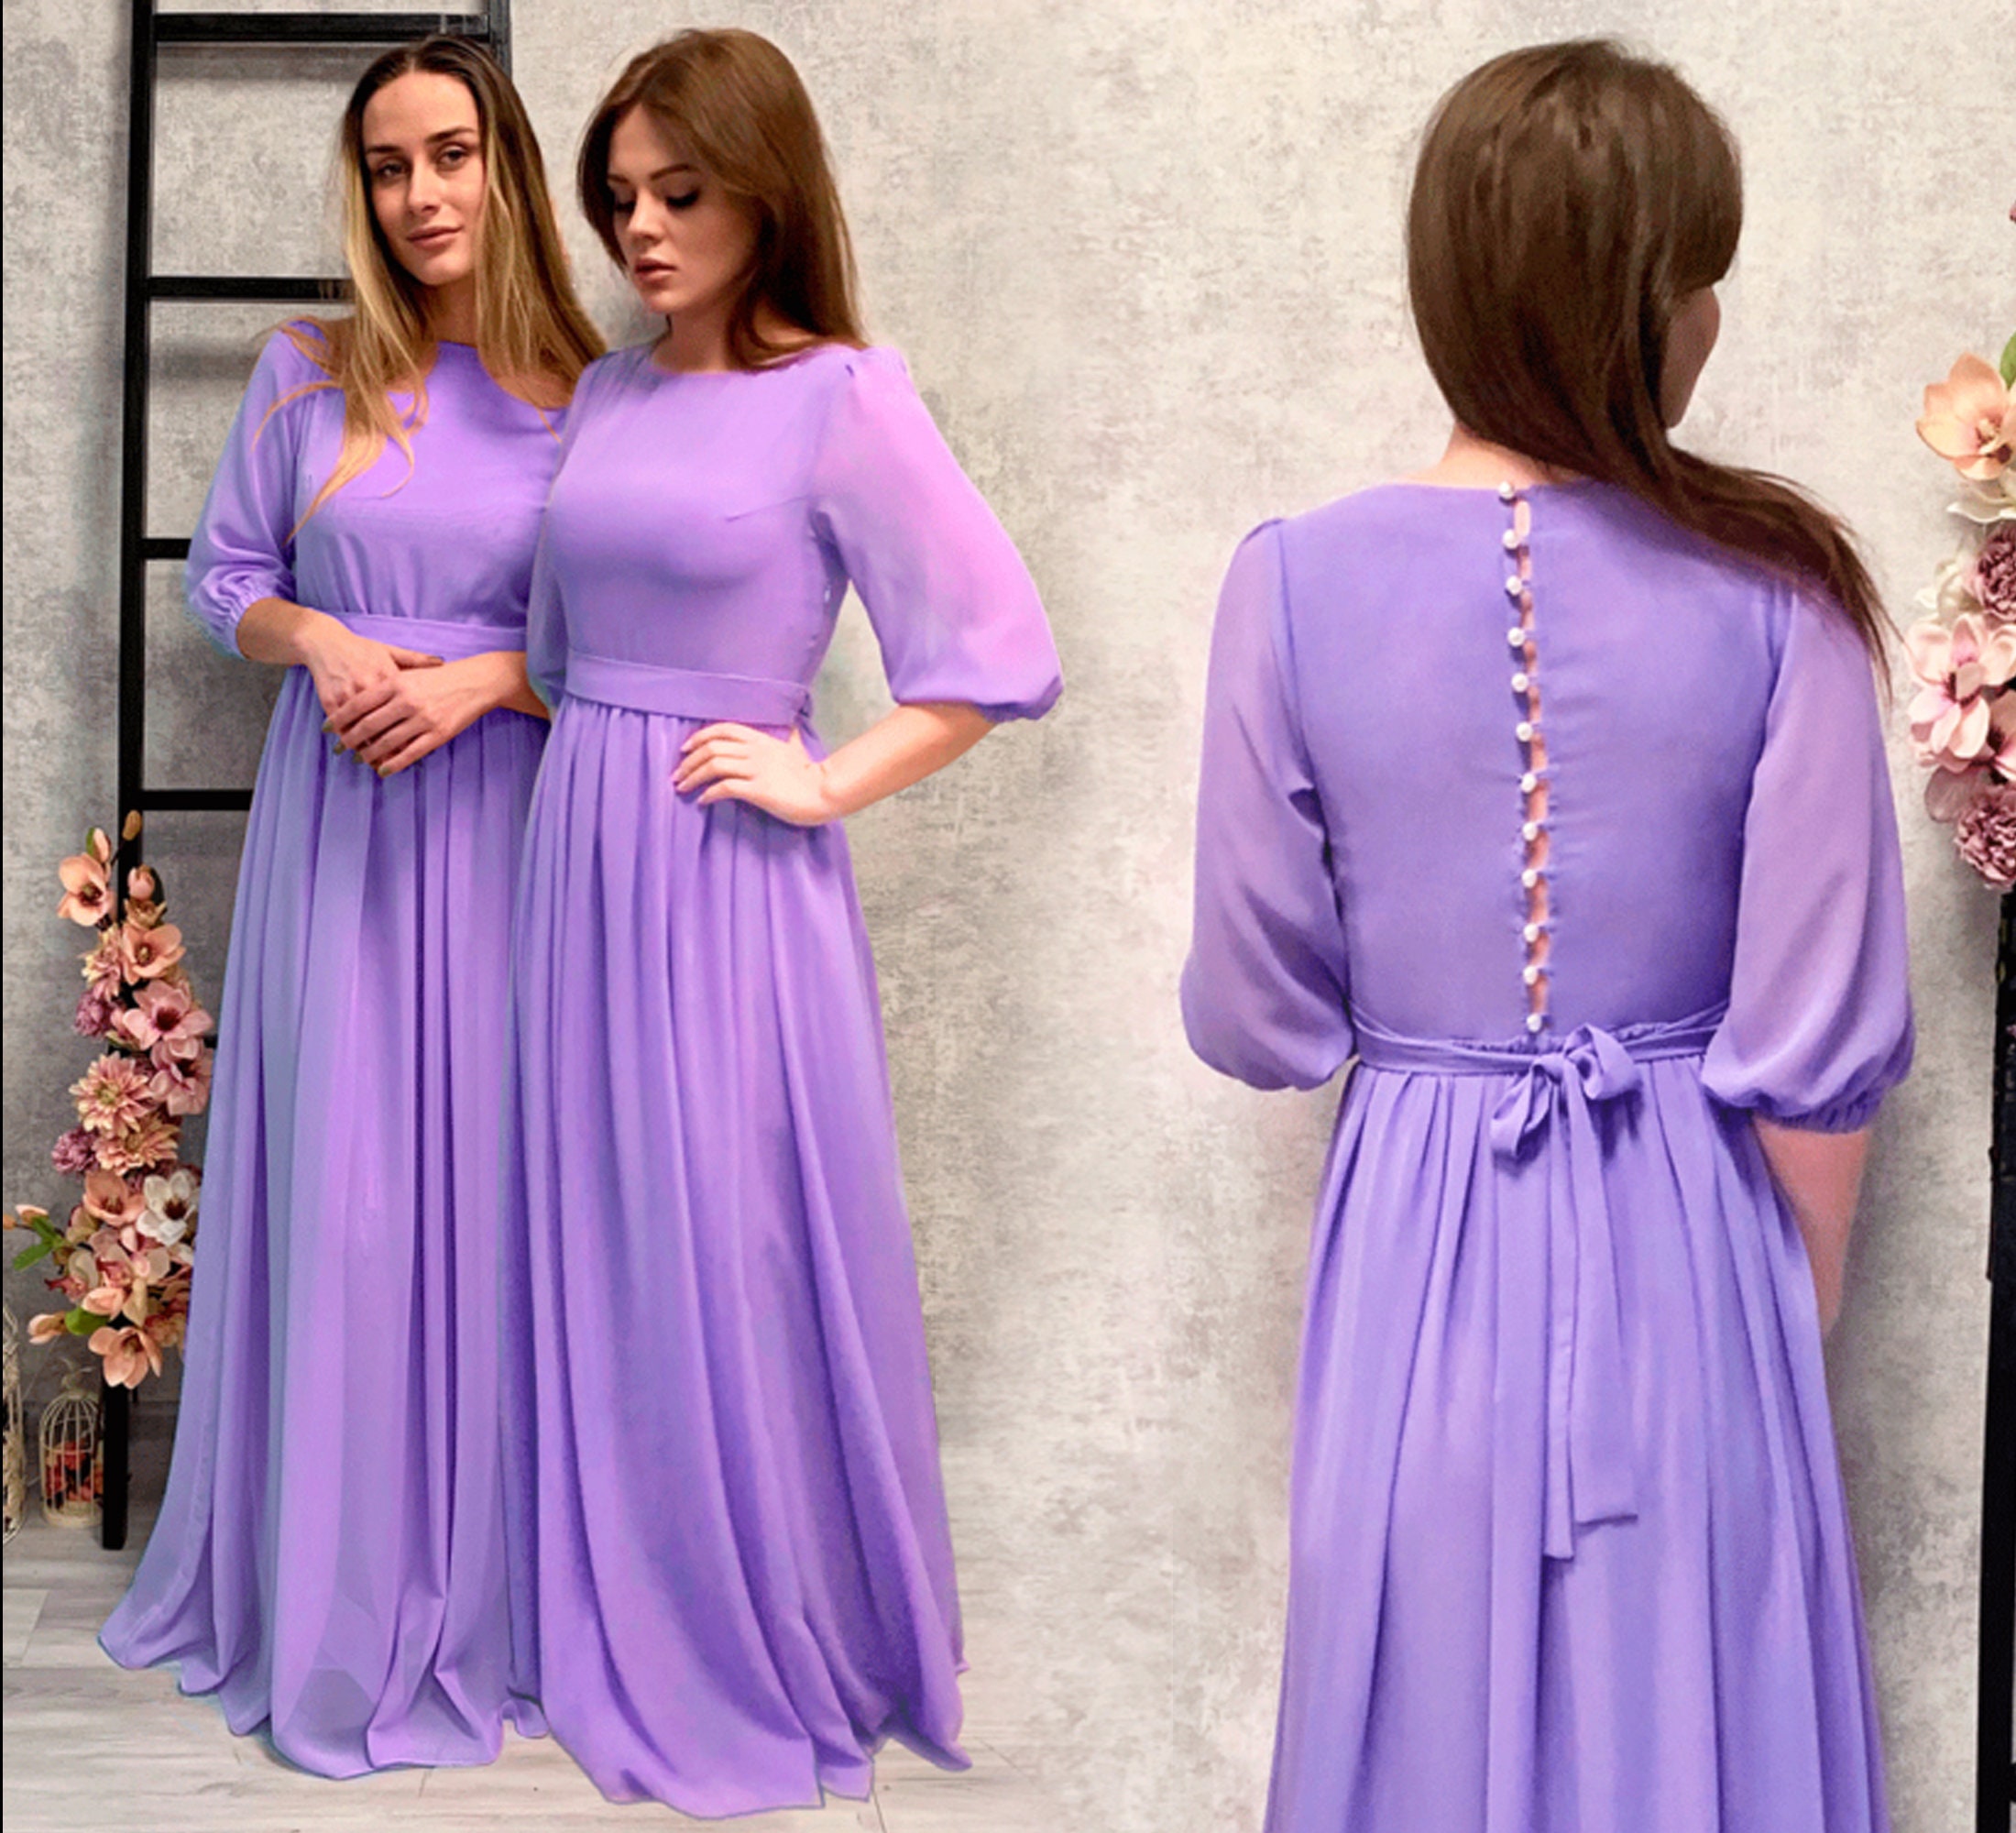 Dusty Lavender Bridesmaid Dresses - Free Shipping - Carlyna